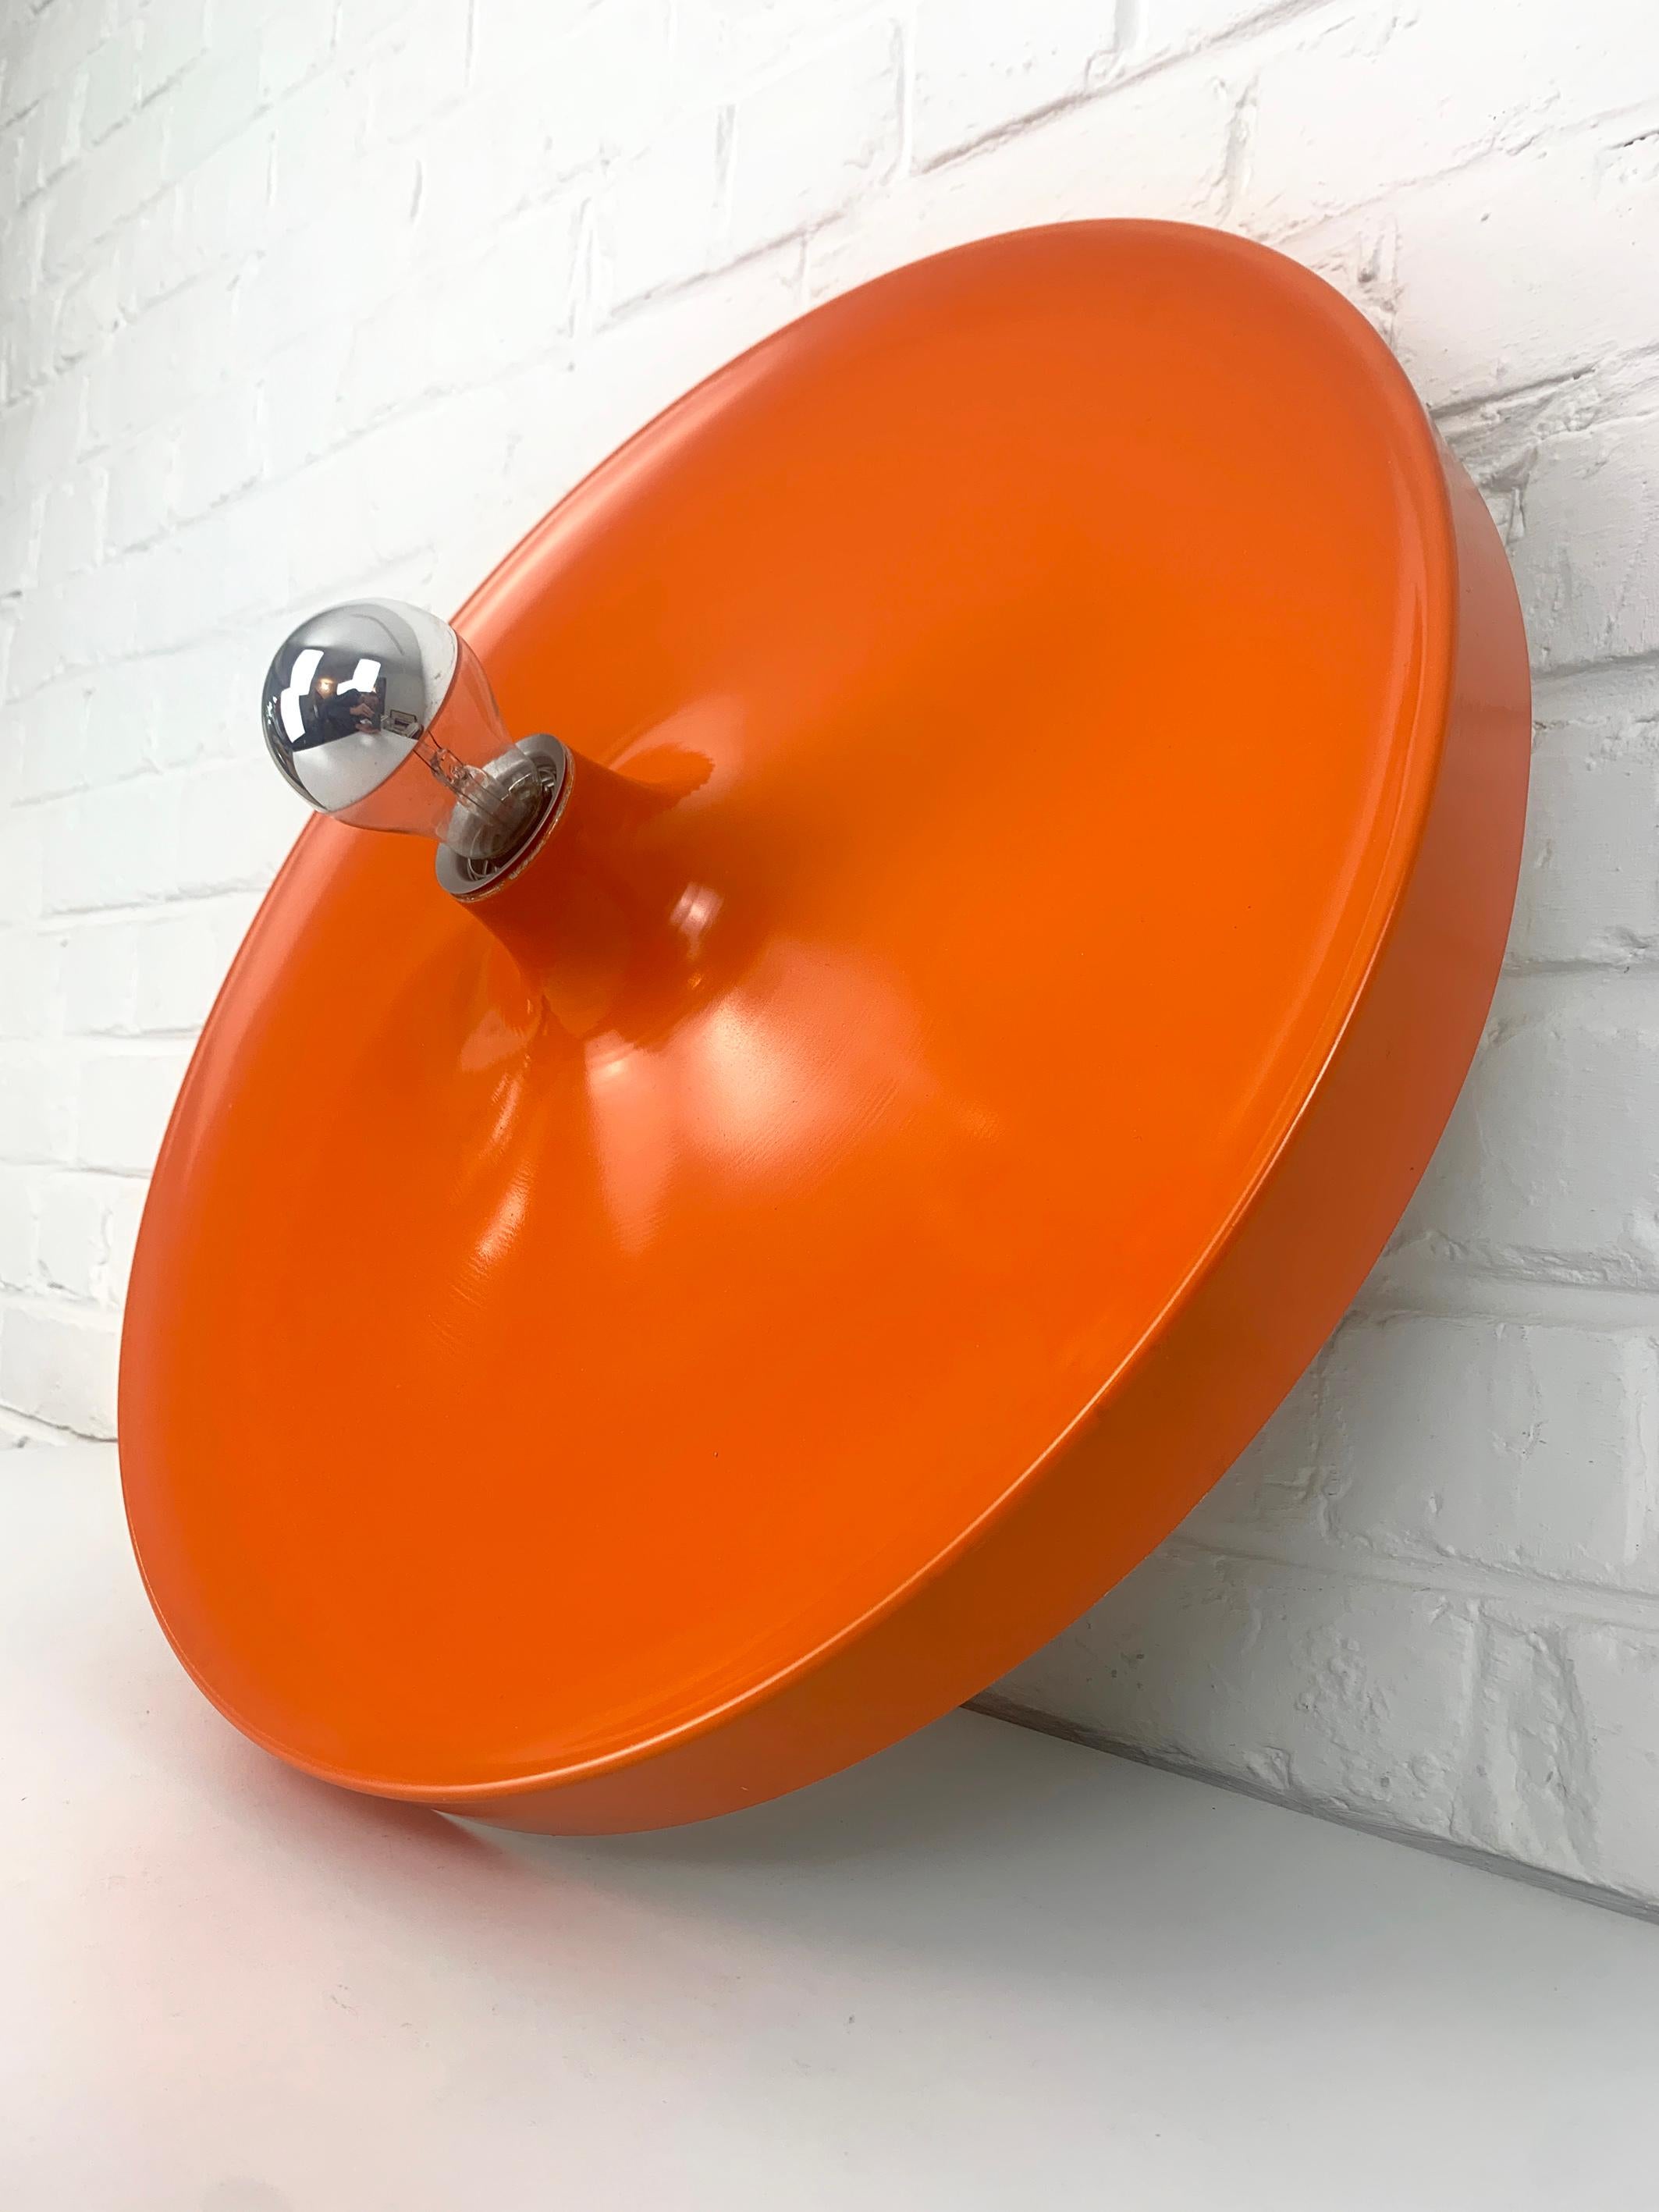 Aluminum Large Charlotte Perriand Space Age Flush Sconce Disc Wall Light, Germany, 1960s For Sale